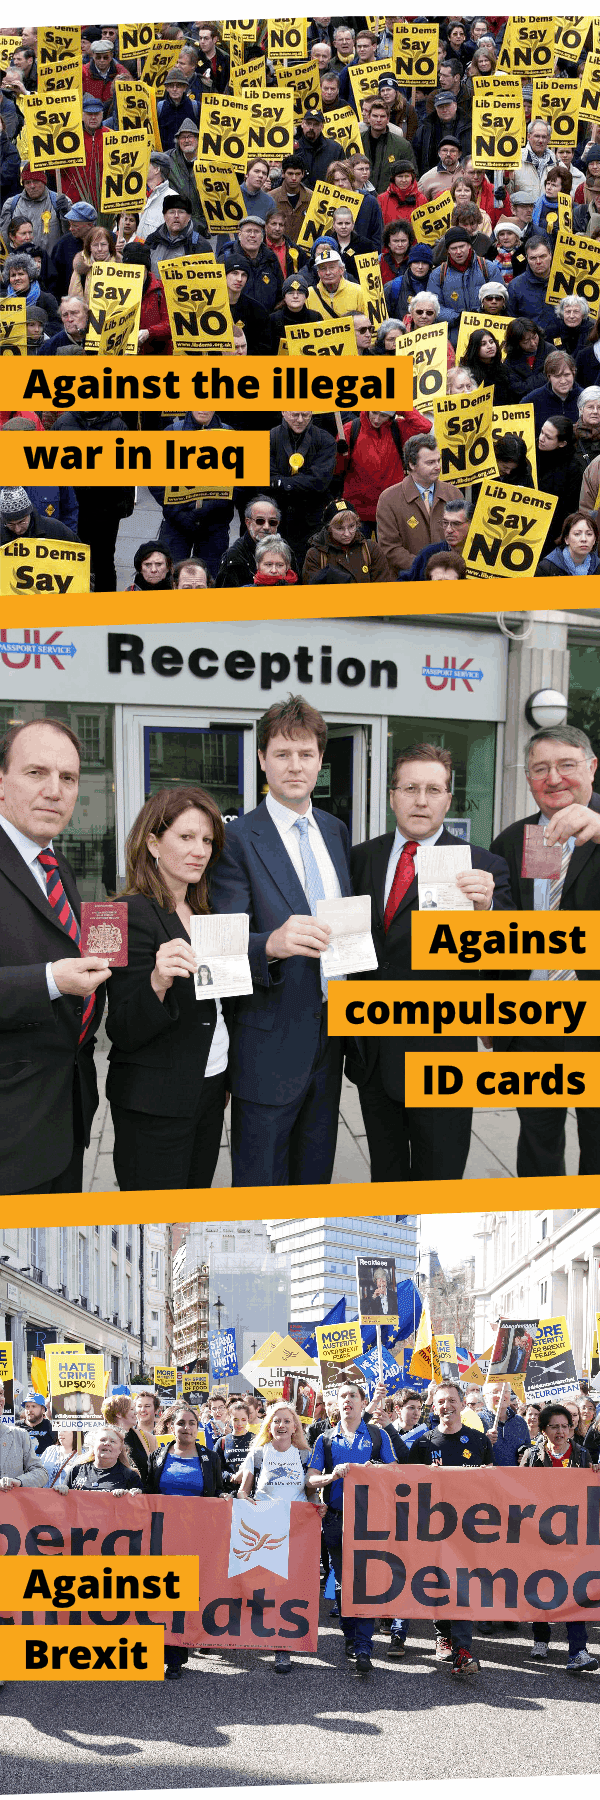 Against the Iraq War, against compulsory ID cards and against
Brexit